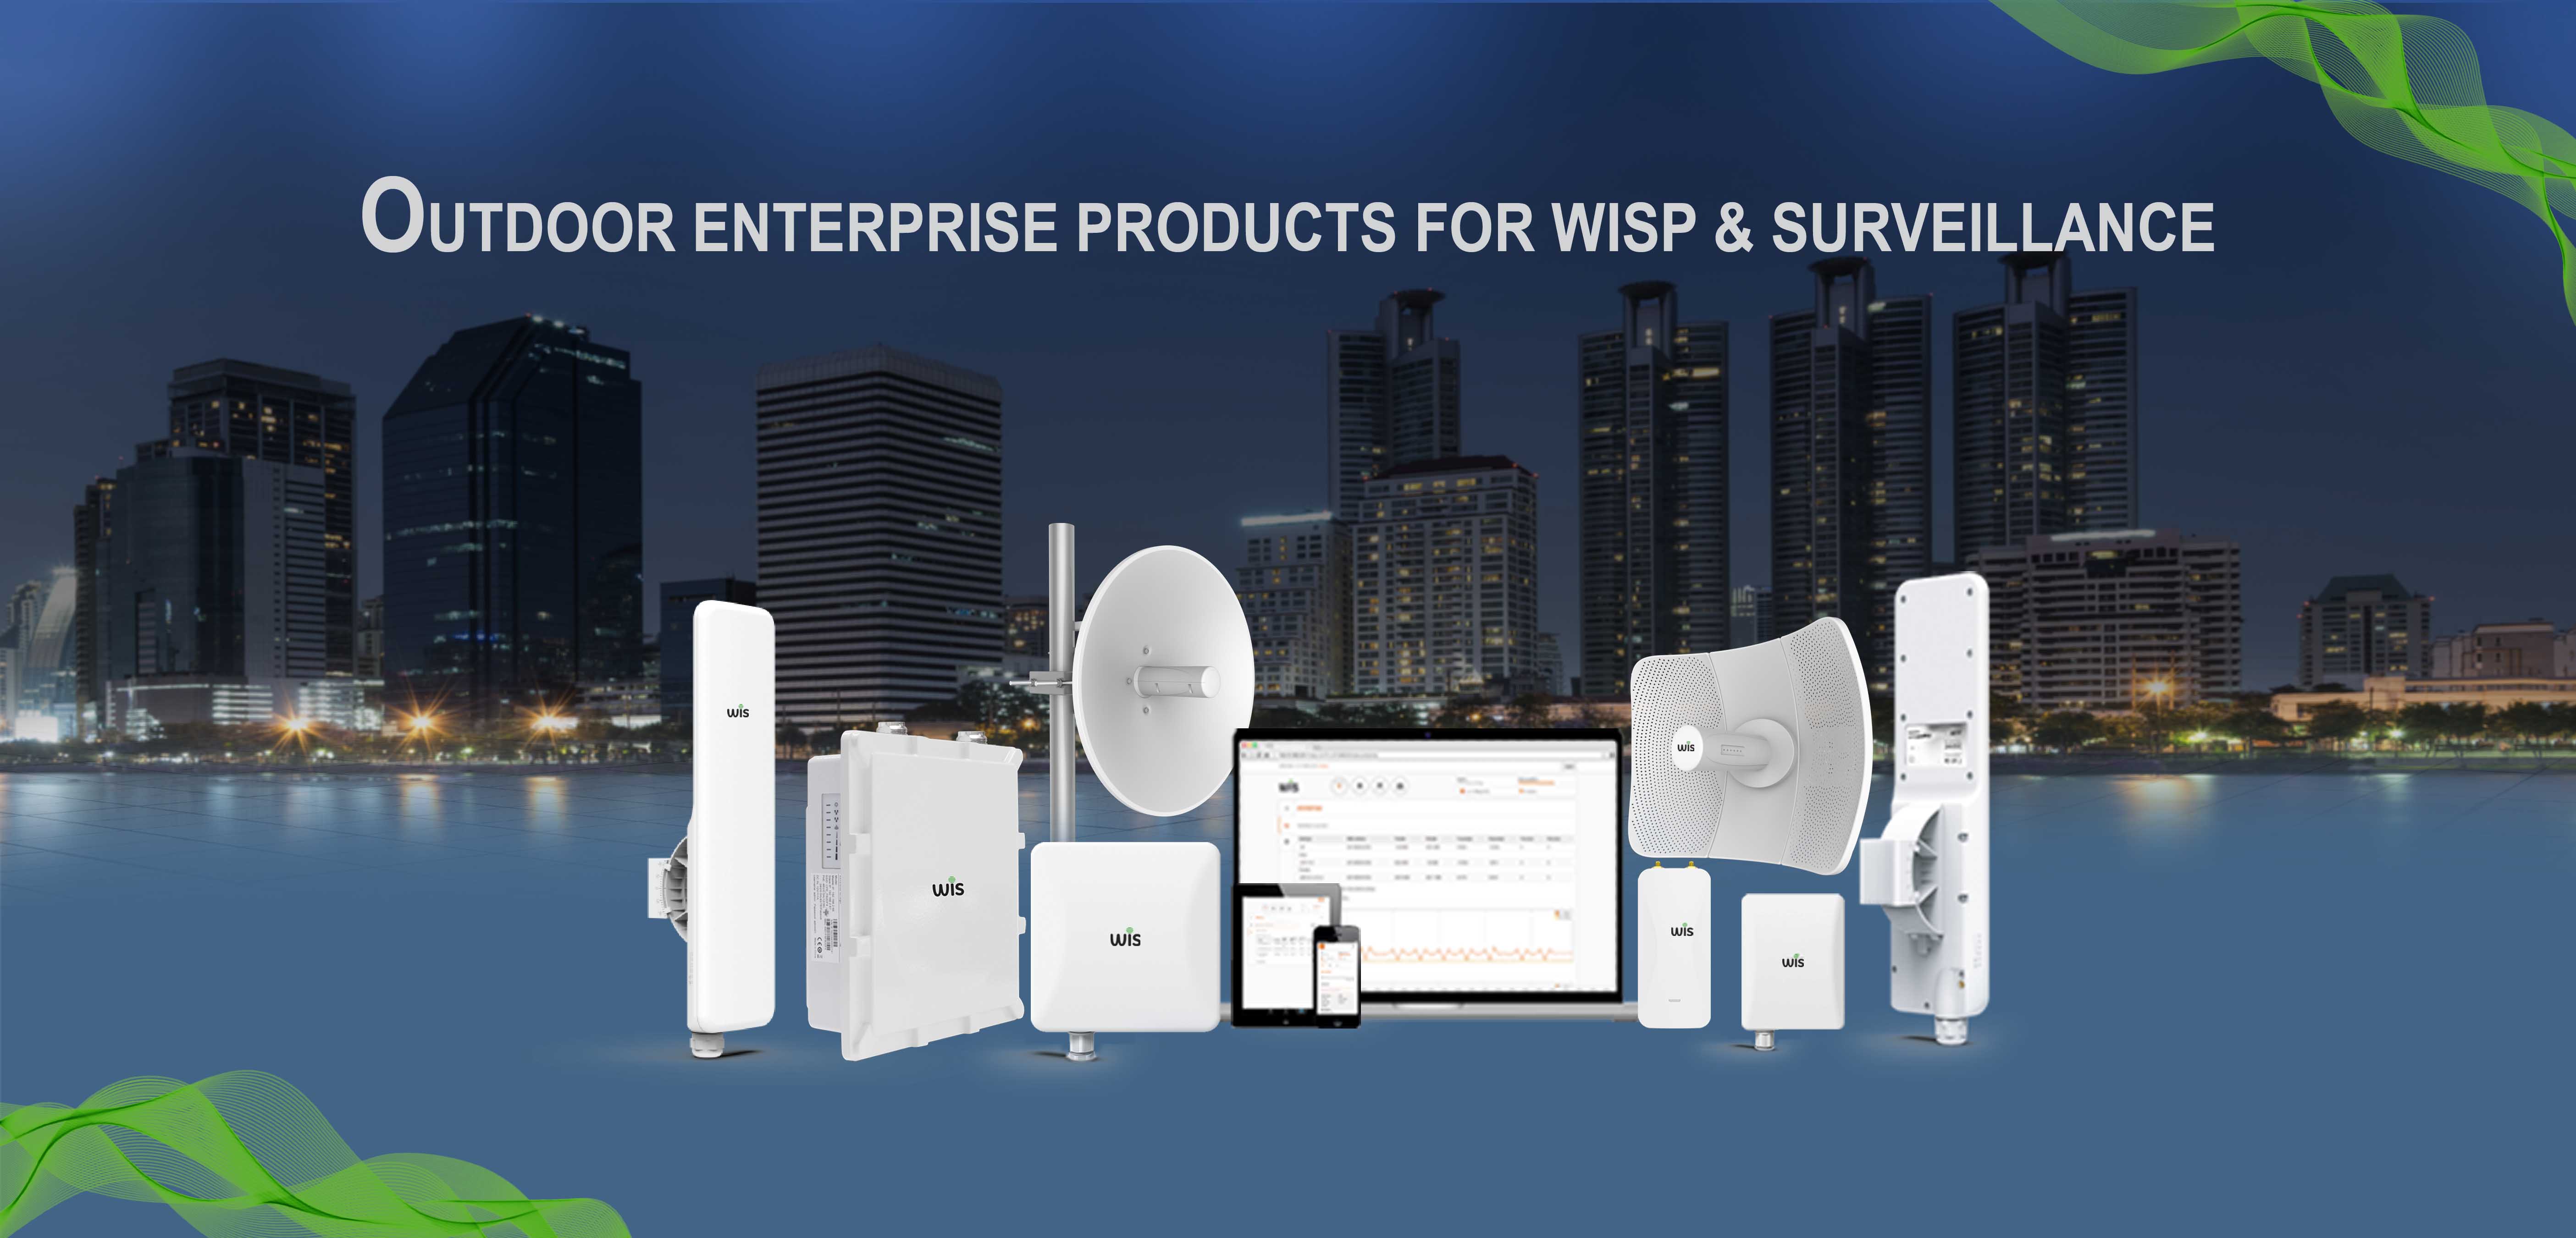 WIS Networks India